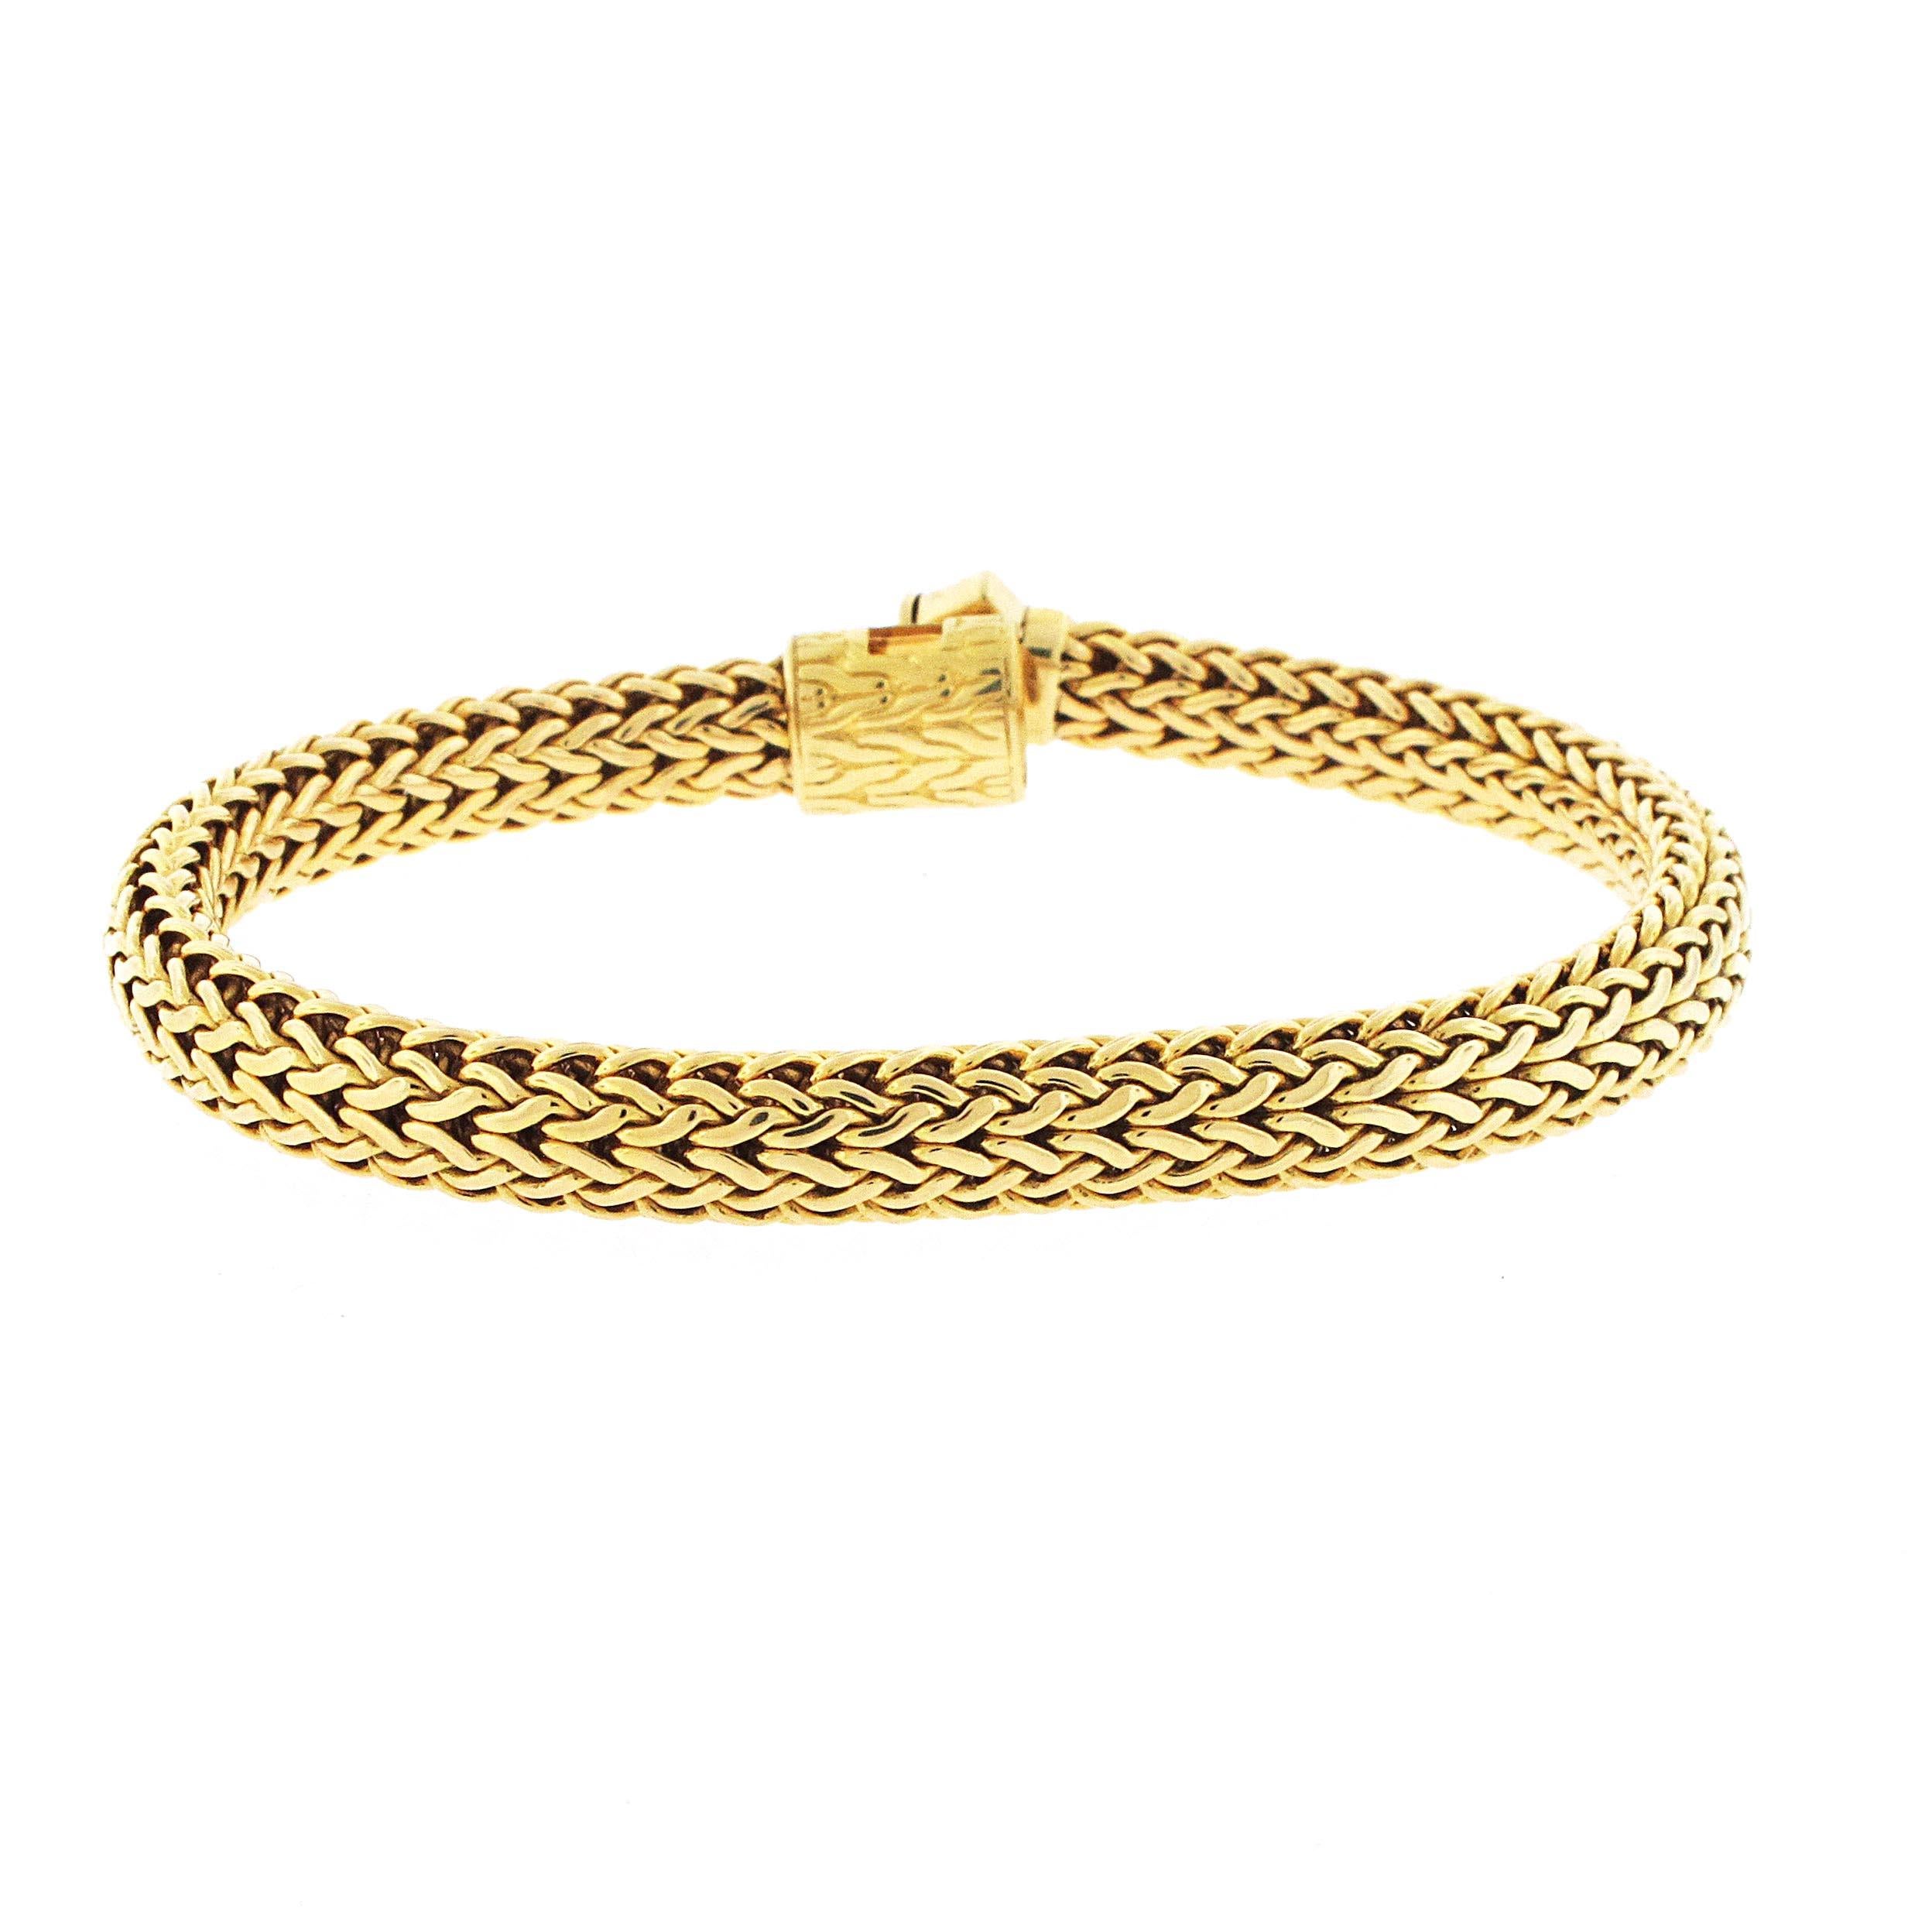 Retail for the 2 bangles is $12,000

This pair of fantastic 18kt yellow gold John Hardy rope wrap bangles are truly special. The way they sit together and you can stack them makes them very versatile. They are in extremely great condition and look